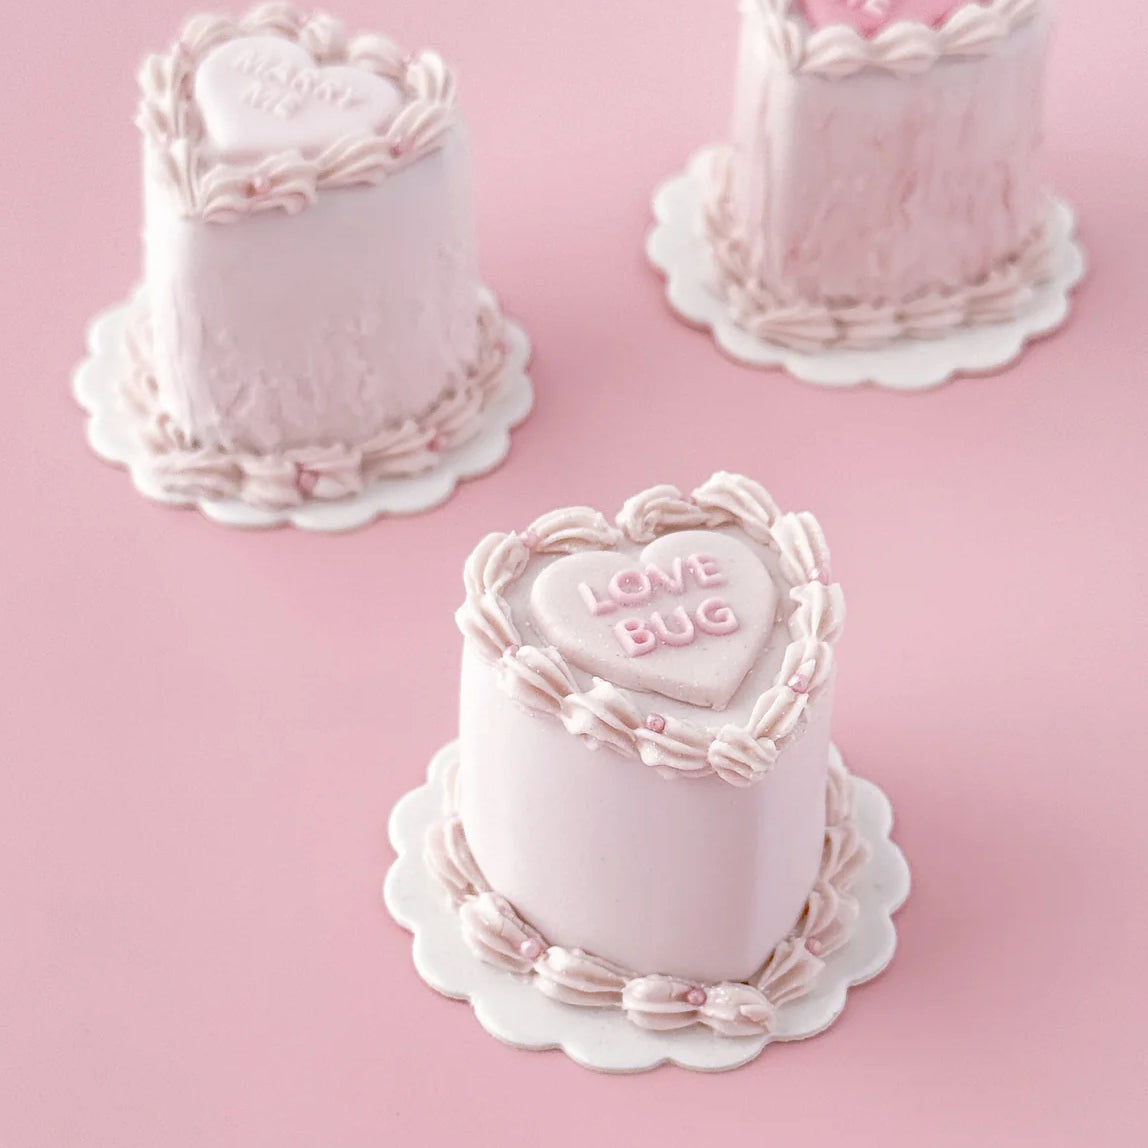 ITS TIMEEEEE!!💗💗 our newest cake pop mold, a Tall Heart Cake, is